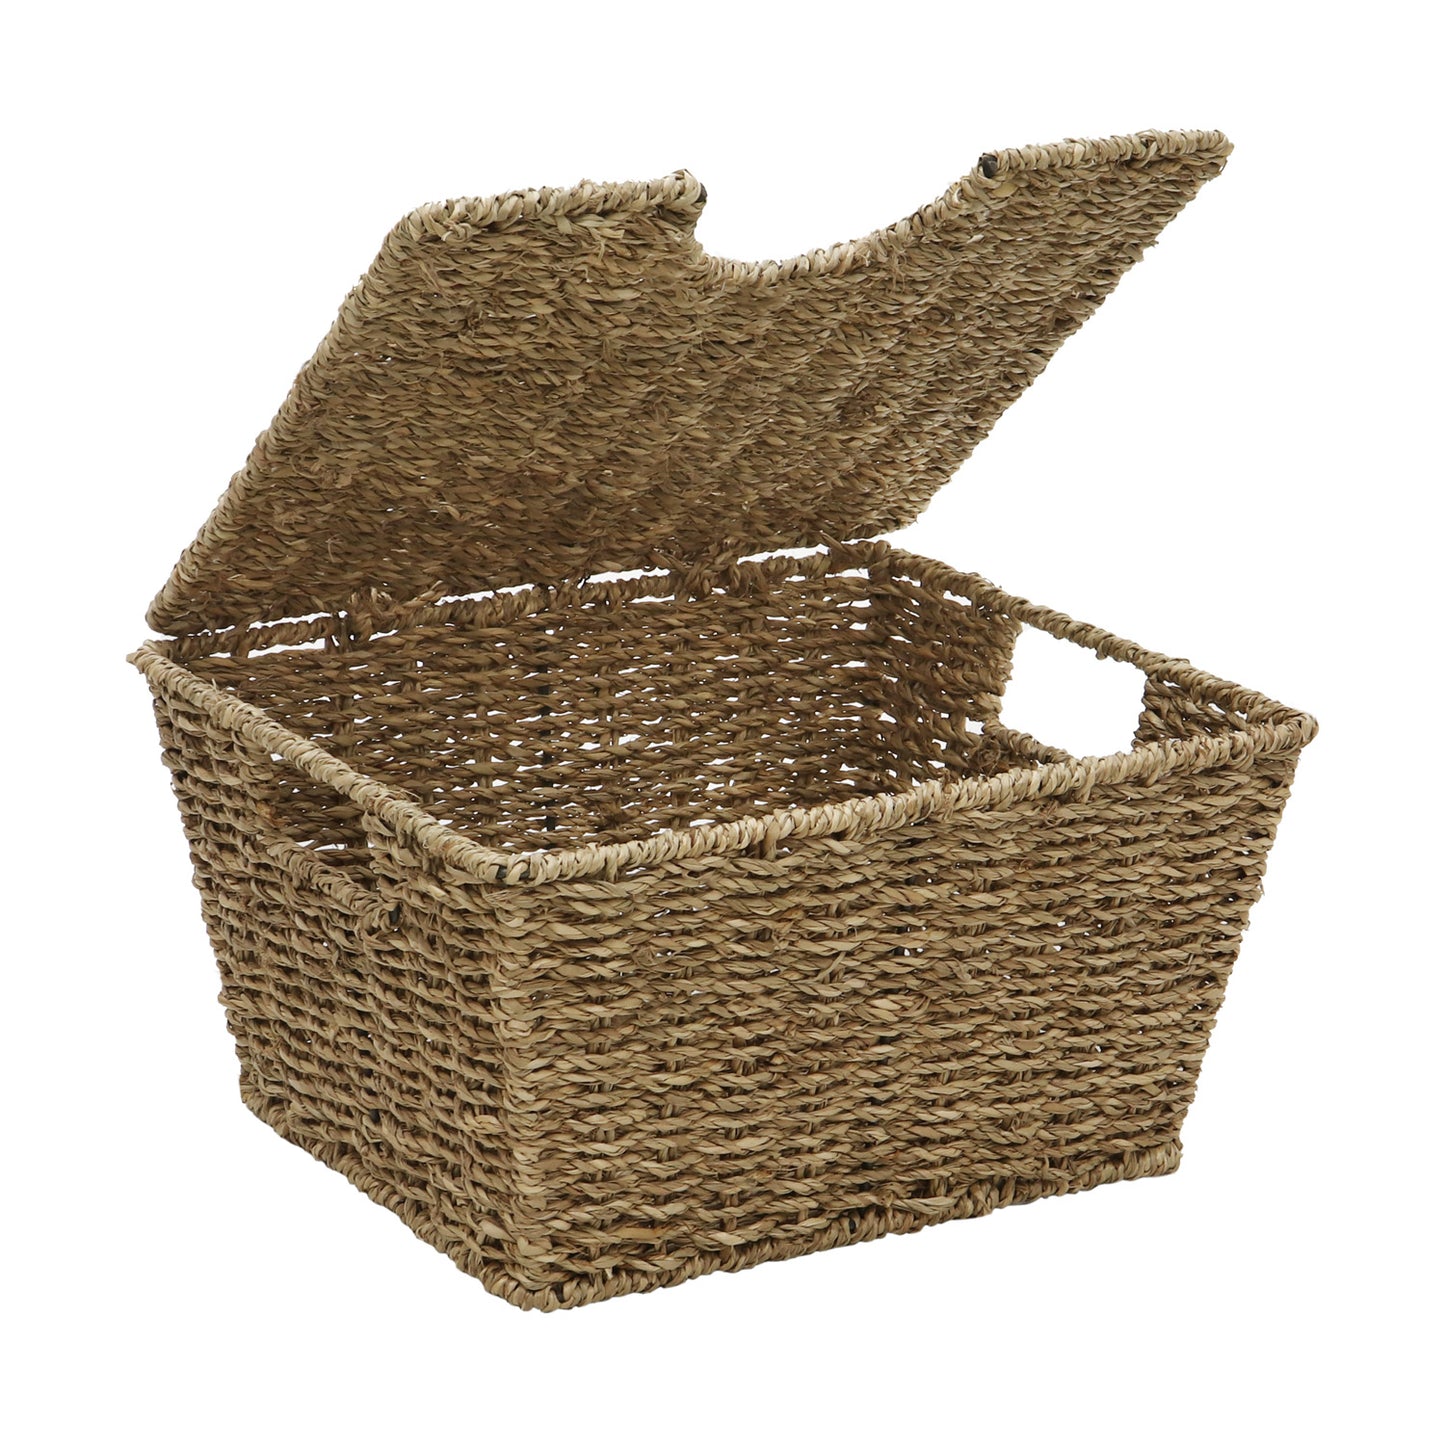 Seagrass Set Of 3 Rectangular Storage Baskets (2 With Lids)